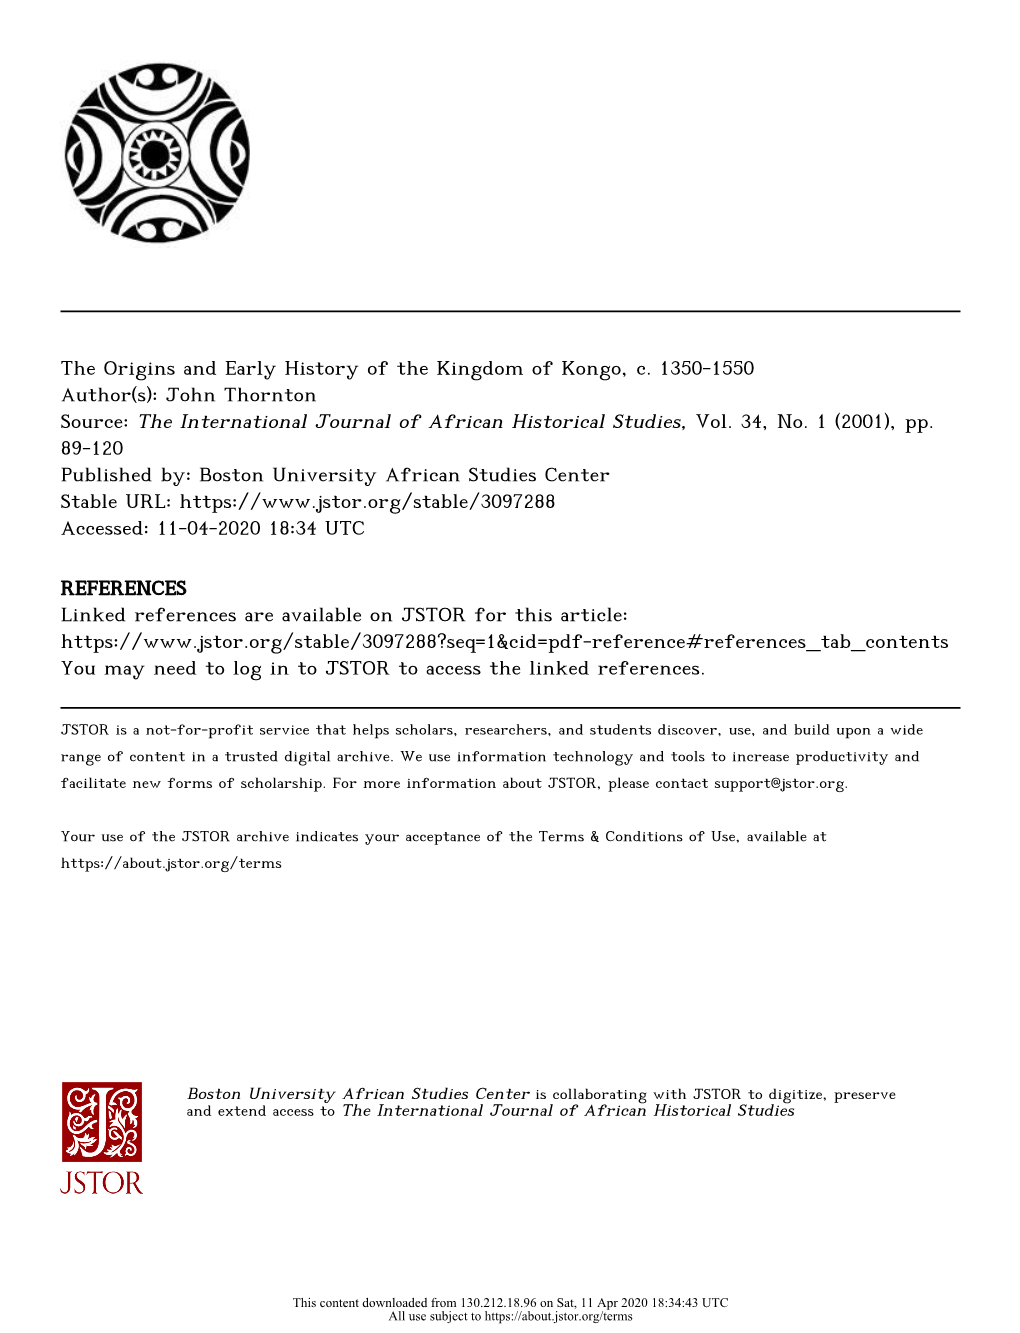 The Origins and Early History of the Kingdom of Kongo, C. 1350-1550 Author(S): John Thornton Source: the International Journal of African Historical Studies, Vol